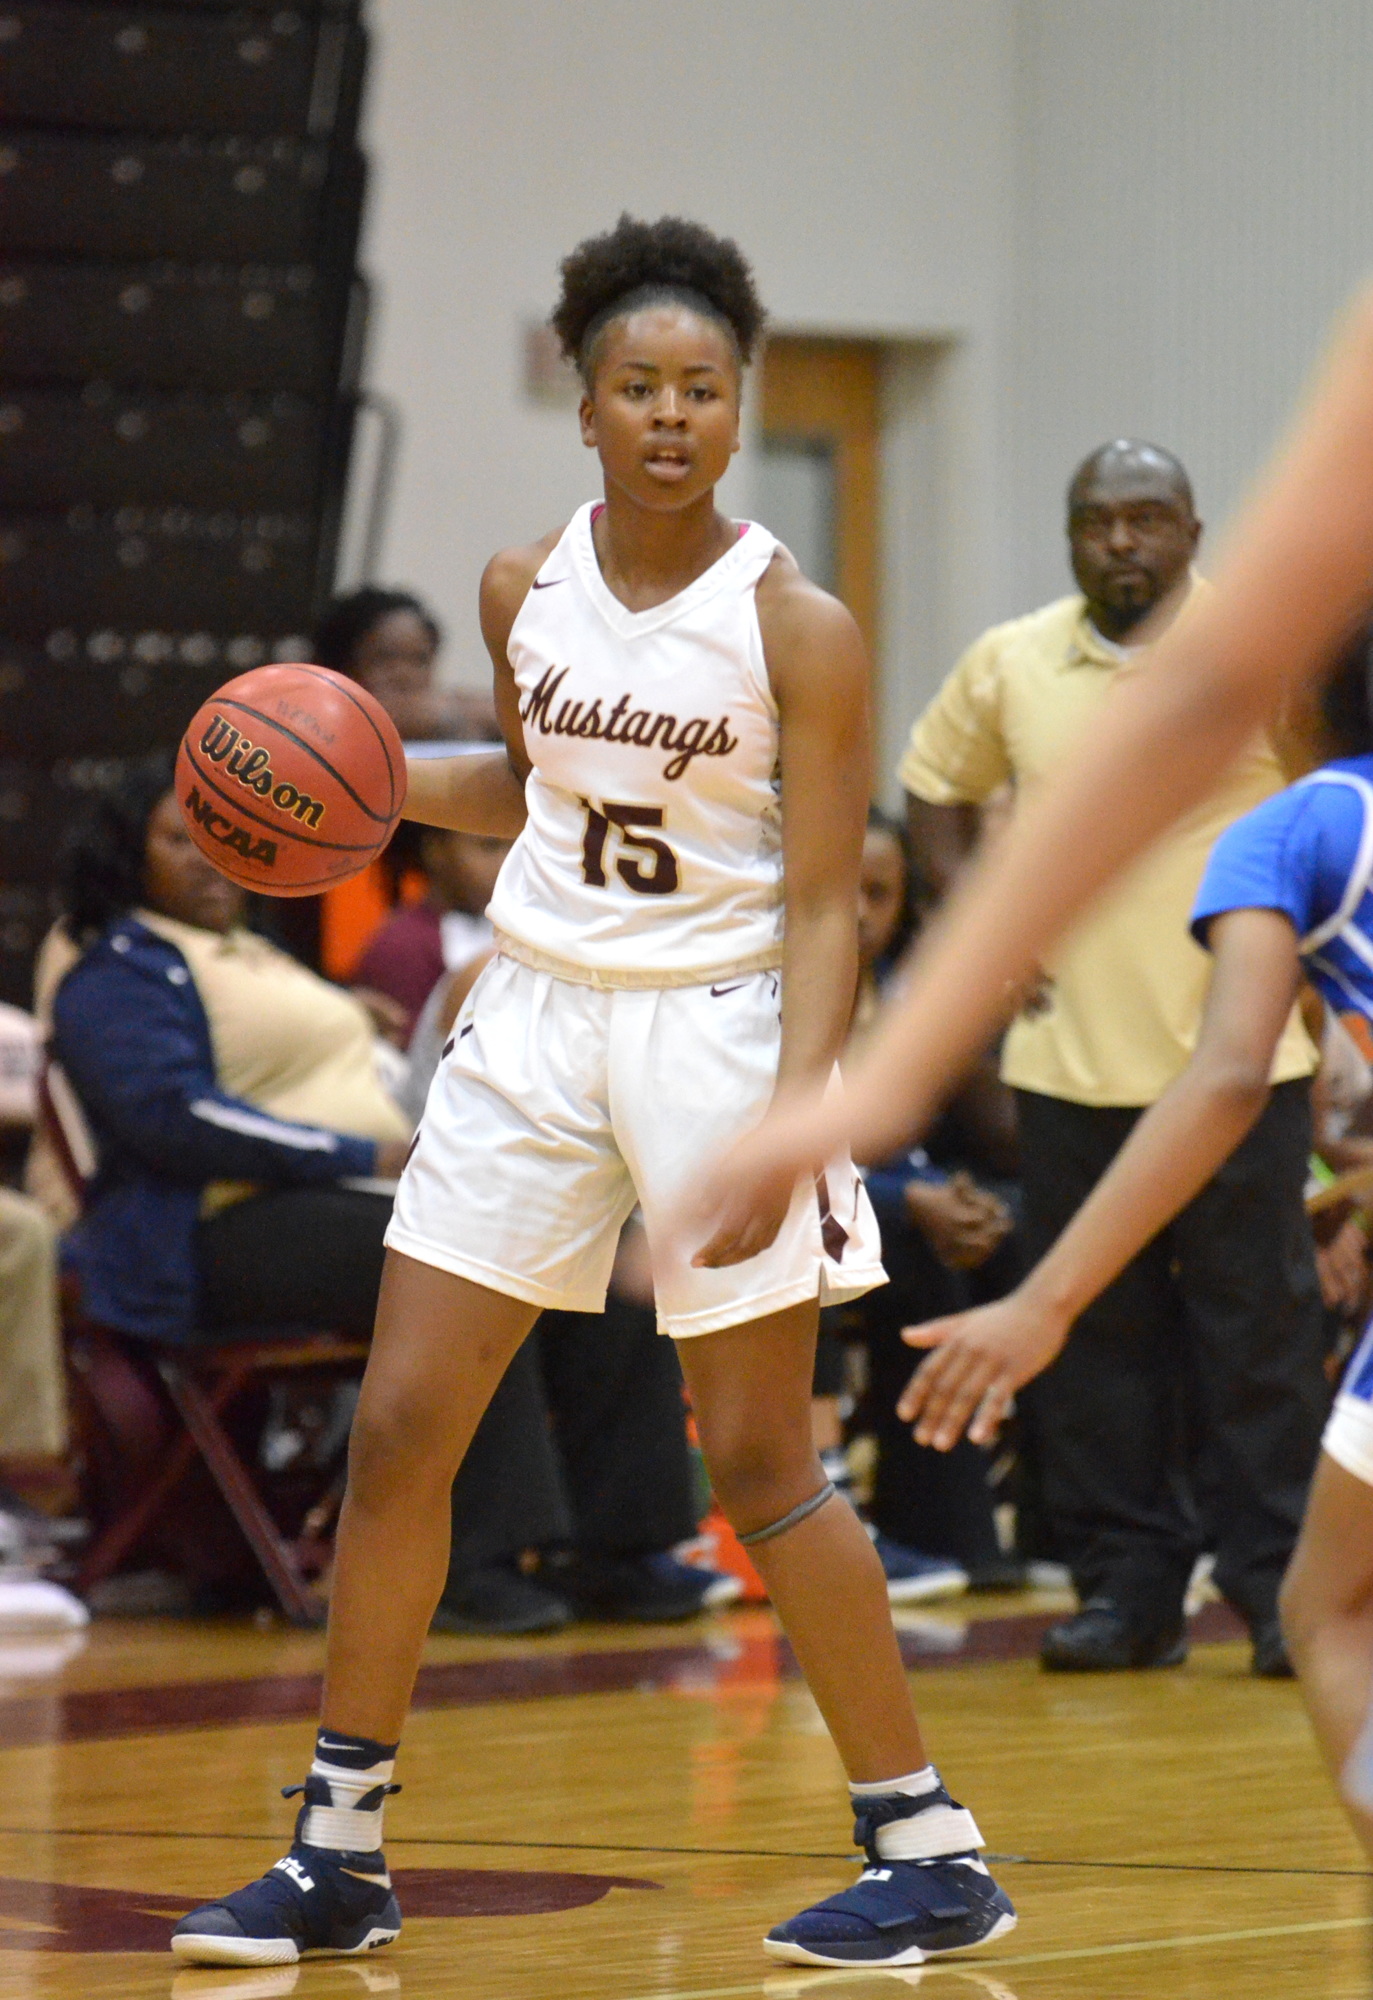 Freshman Emmy James scored a game-high 22 points for Wekiva.